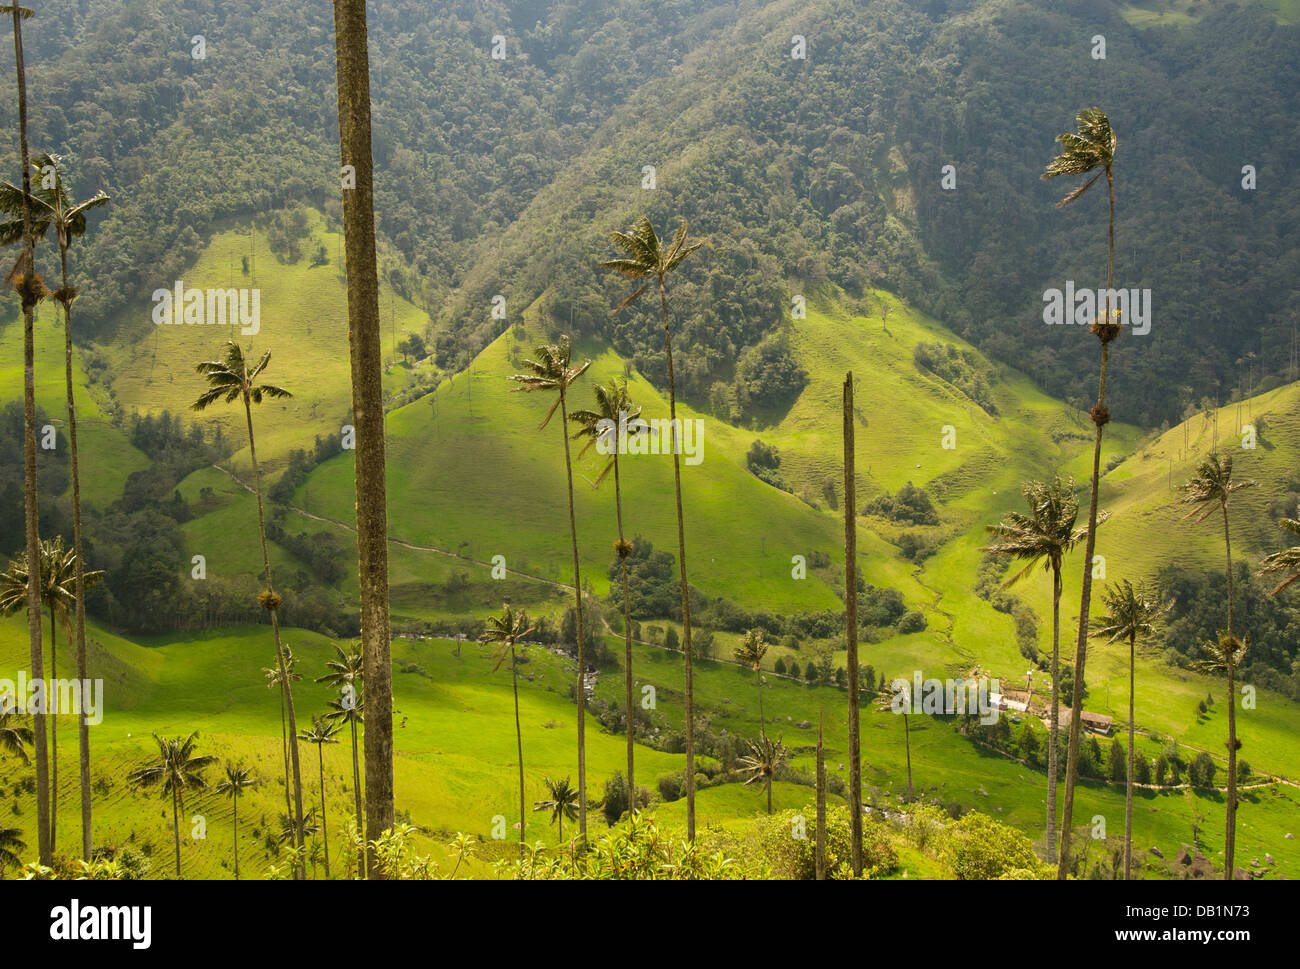 Wax palm trees of Cocora Valley, Colombia Stock Photo